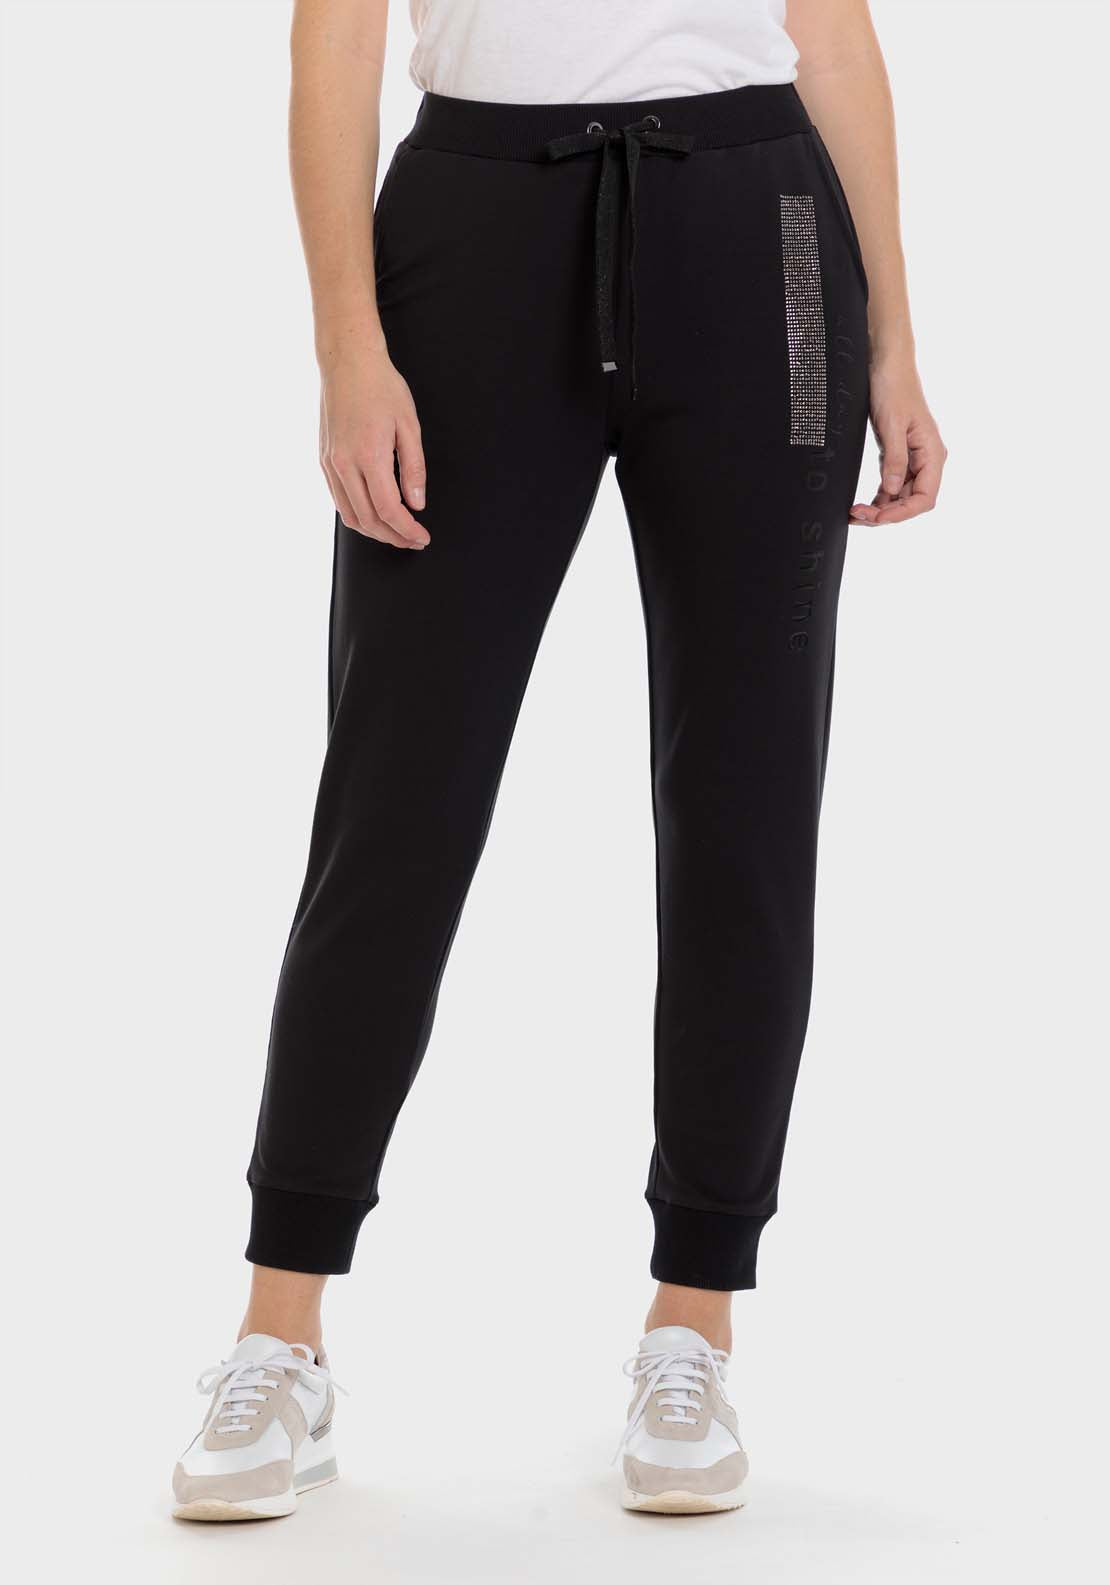 Punt Roma Black Comfy Trousers - Black 1 Shaws Department Stores